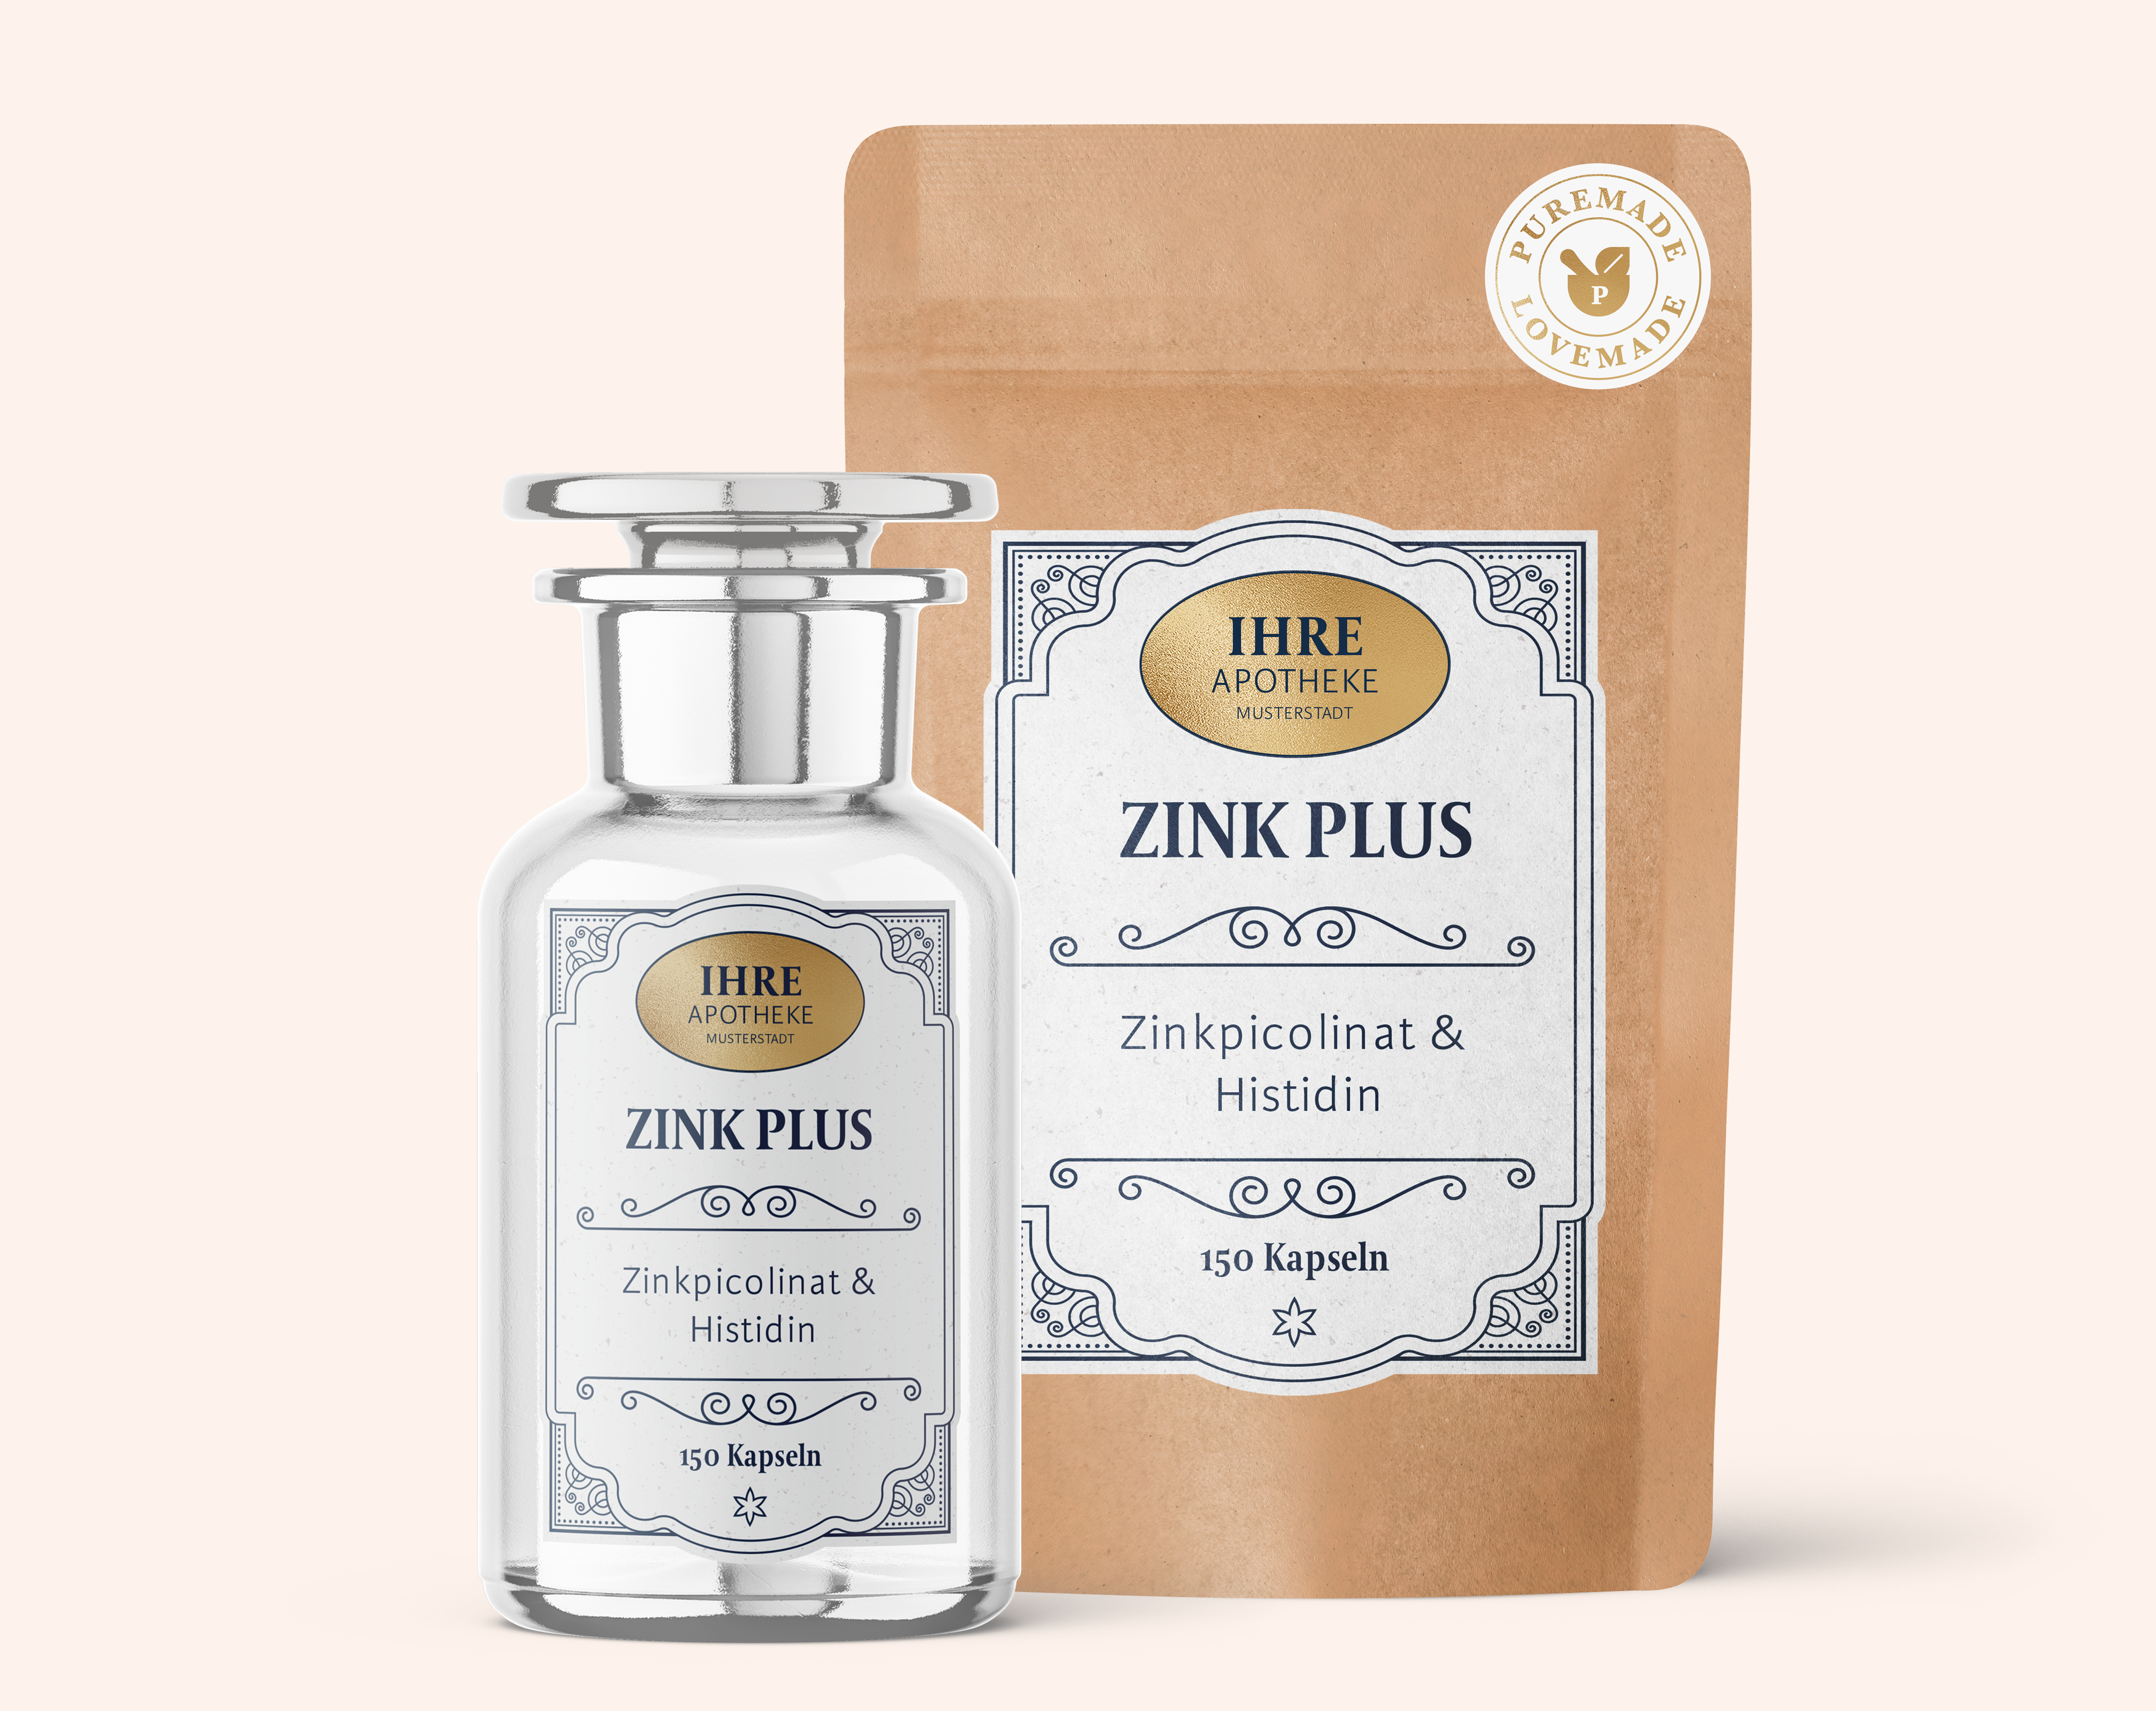 Pharmanufactur_TRADITION_Zink_Plus_Duo_Gold